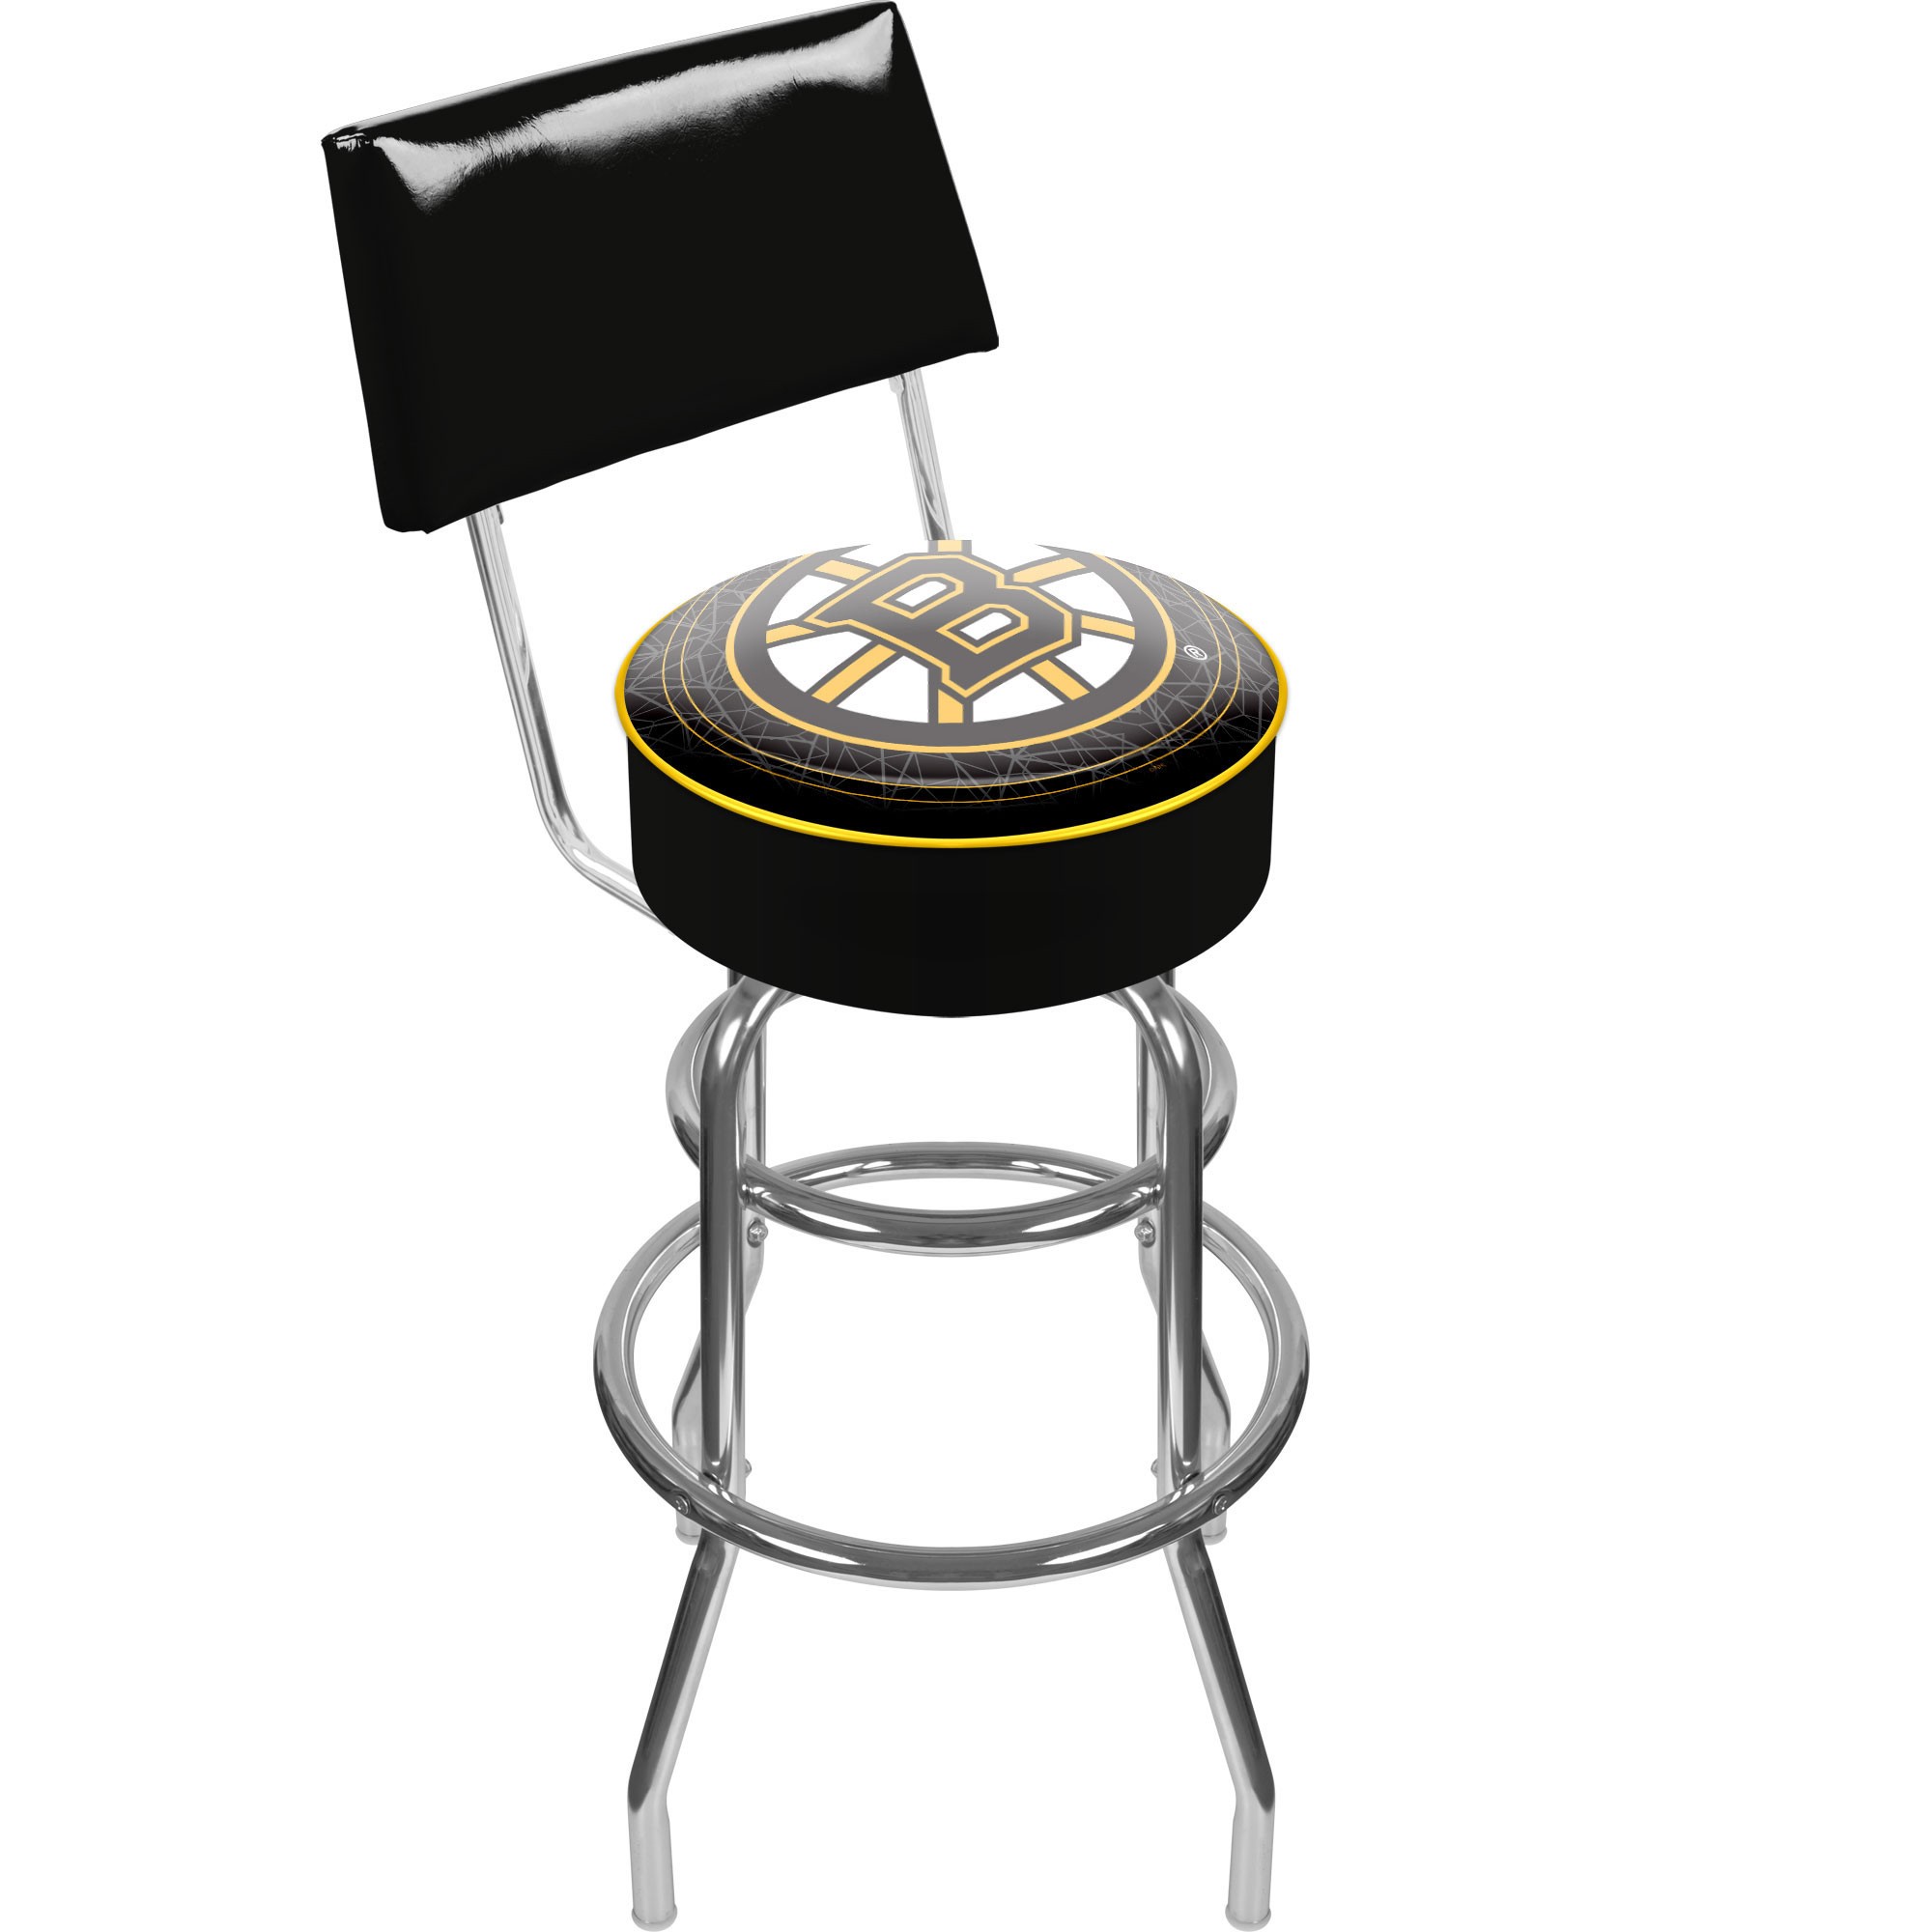 NASCAR Padded Swivel Bar Stool With Back, 41-Inches Tall